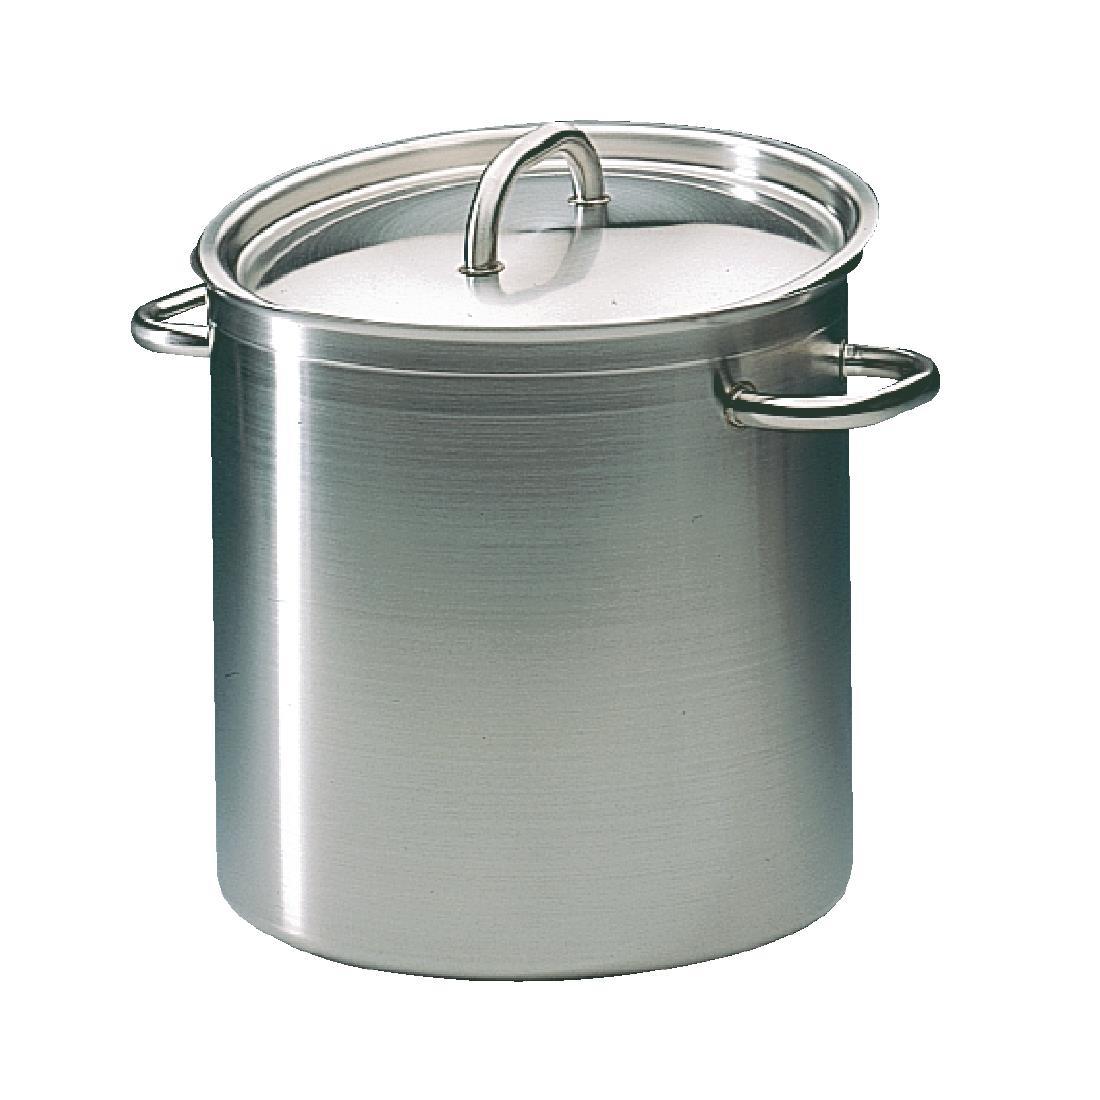 Matfer Bourgeat Stainless Steel Saucepan Lid 280mm - K835 - Buy Online at  Nisbets